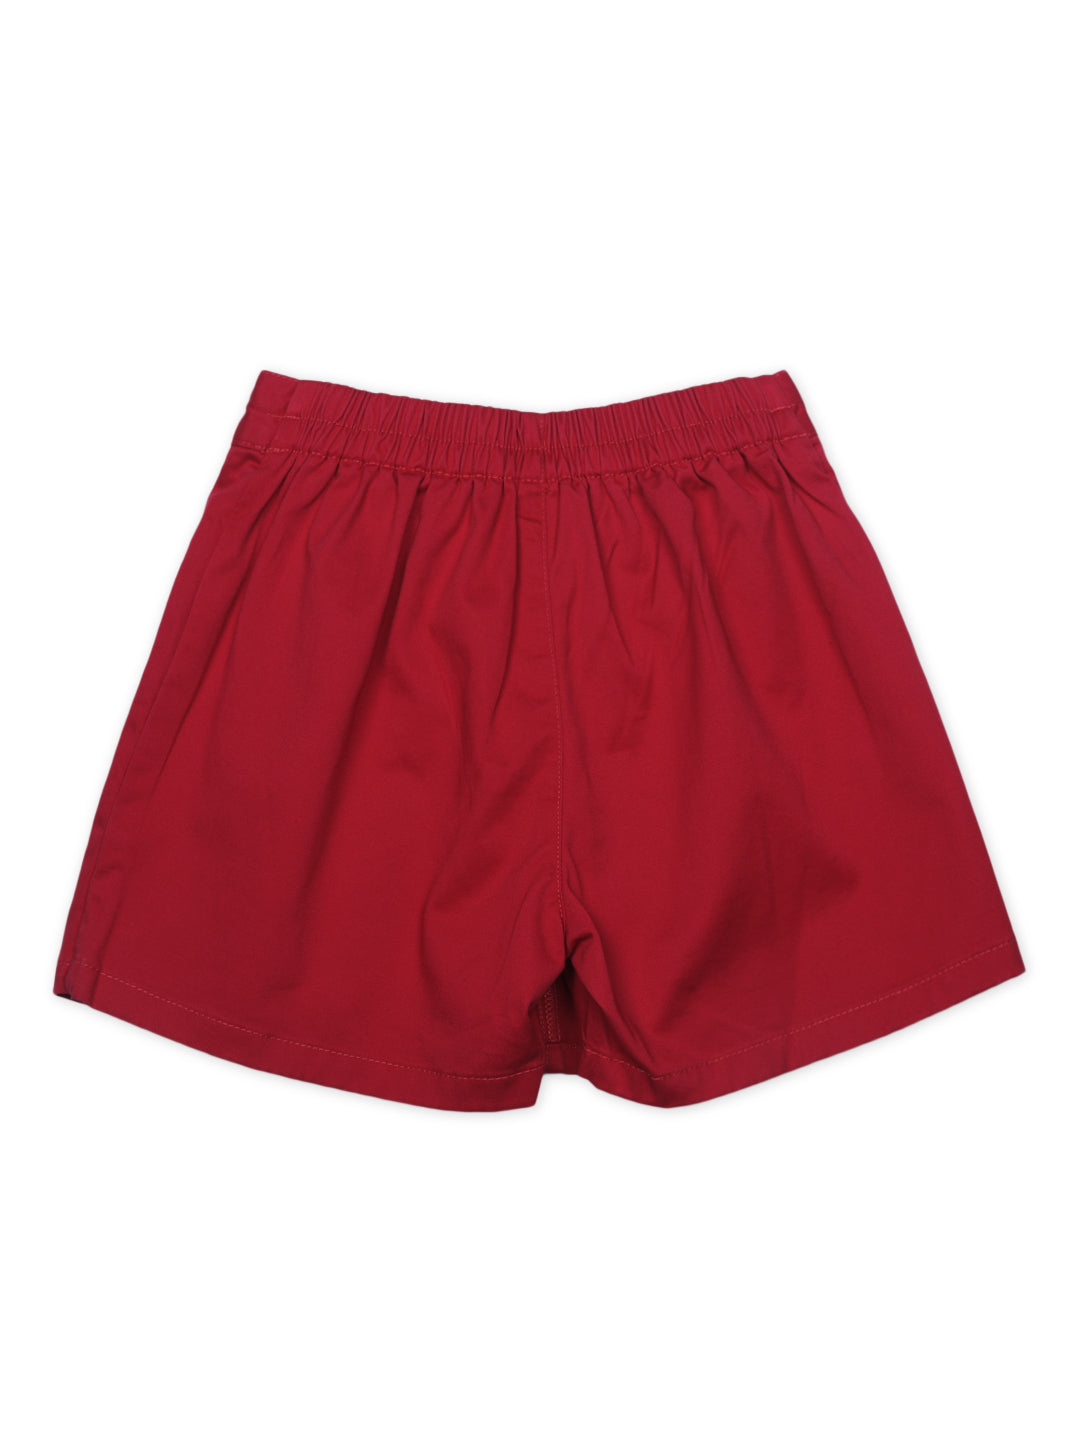 Girls Red Cotton Solid Elasticated Skirt